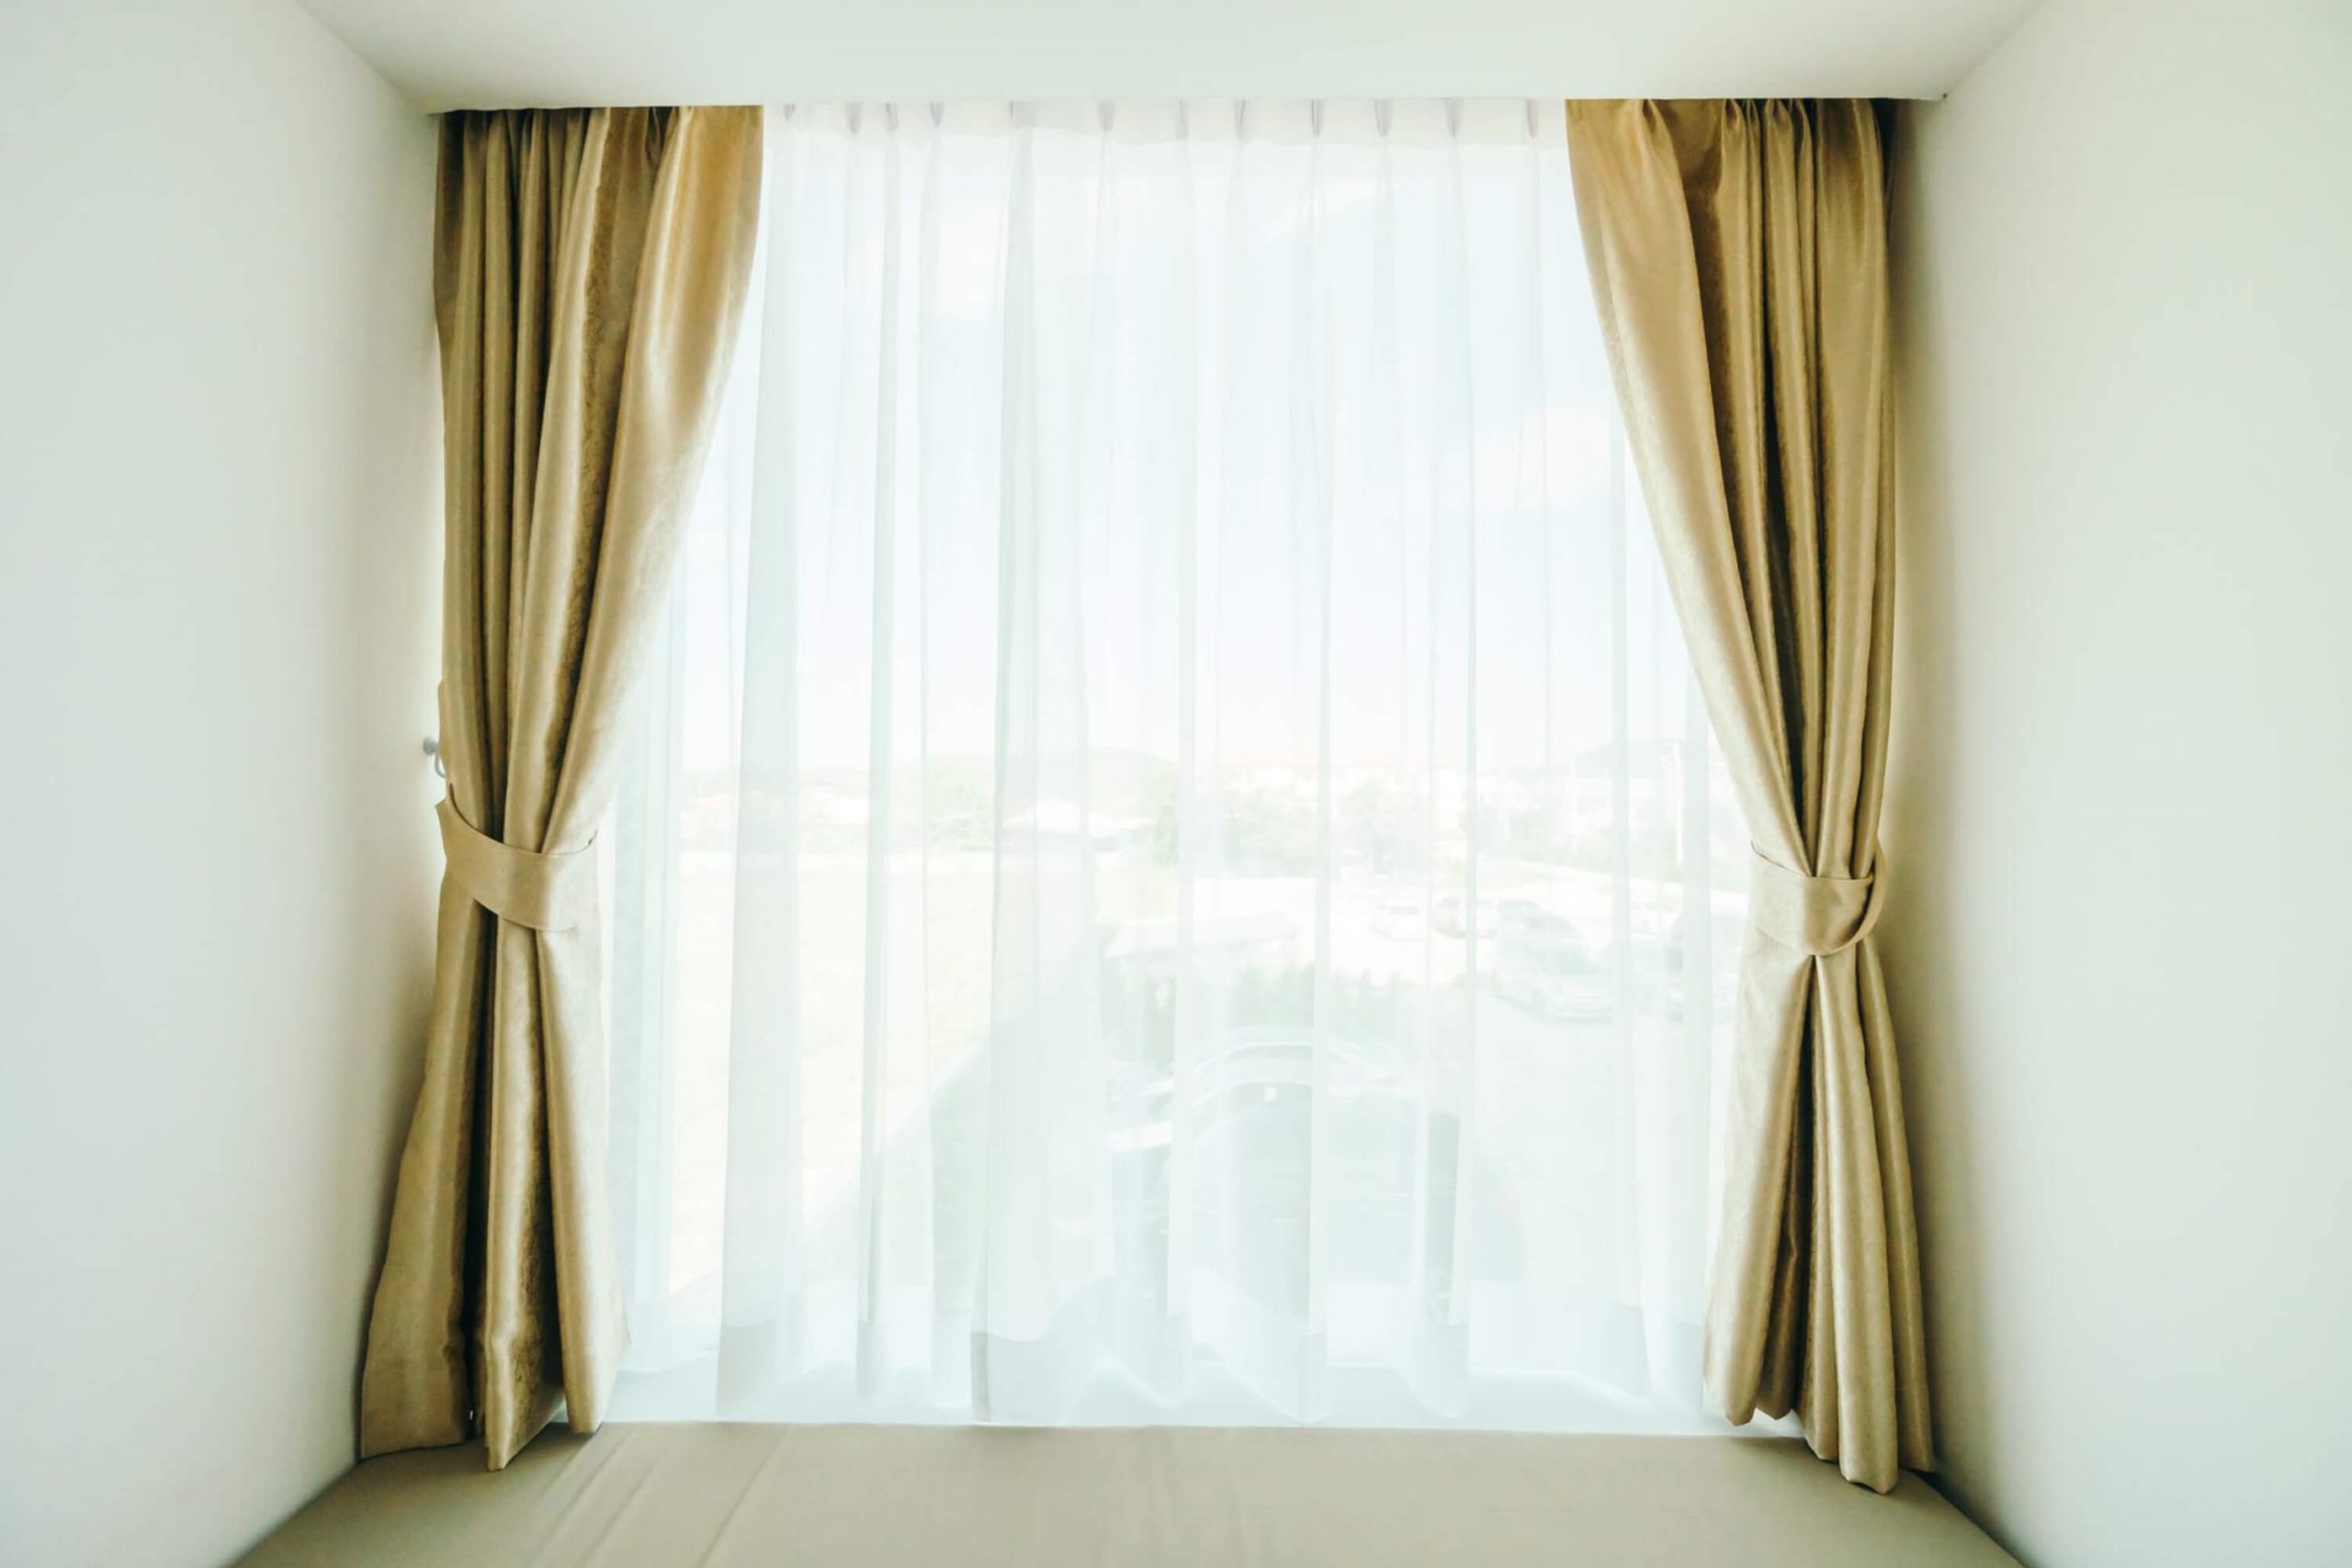 How To Wash Blackout Curtains
